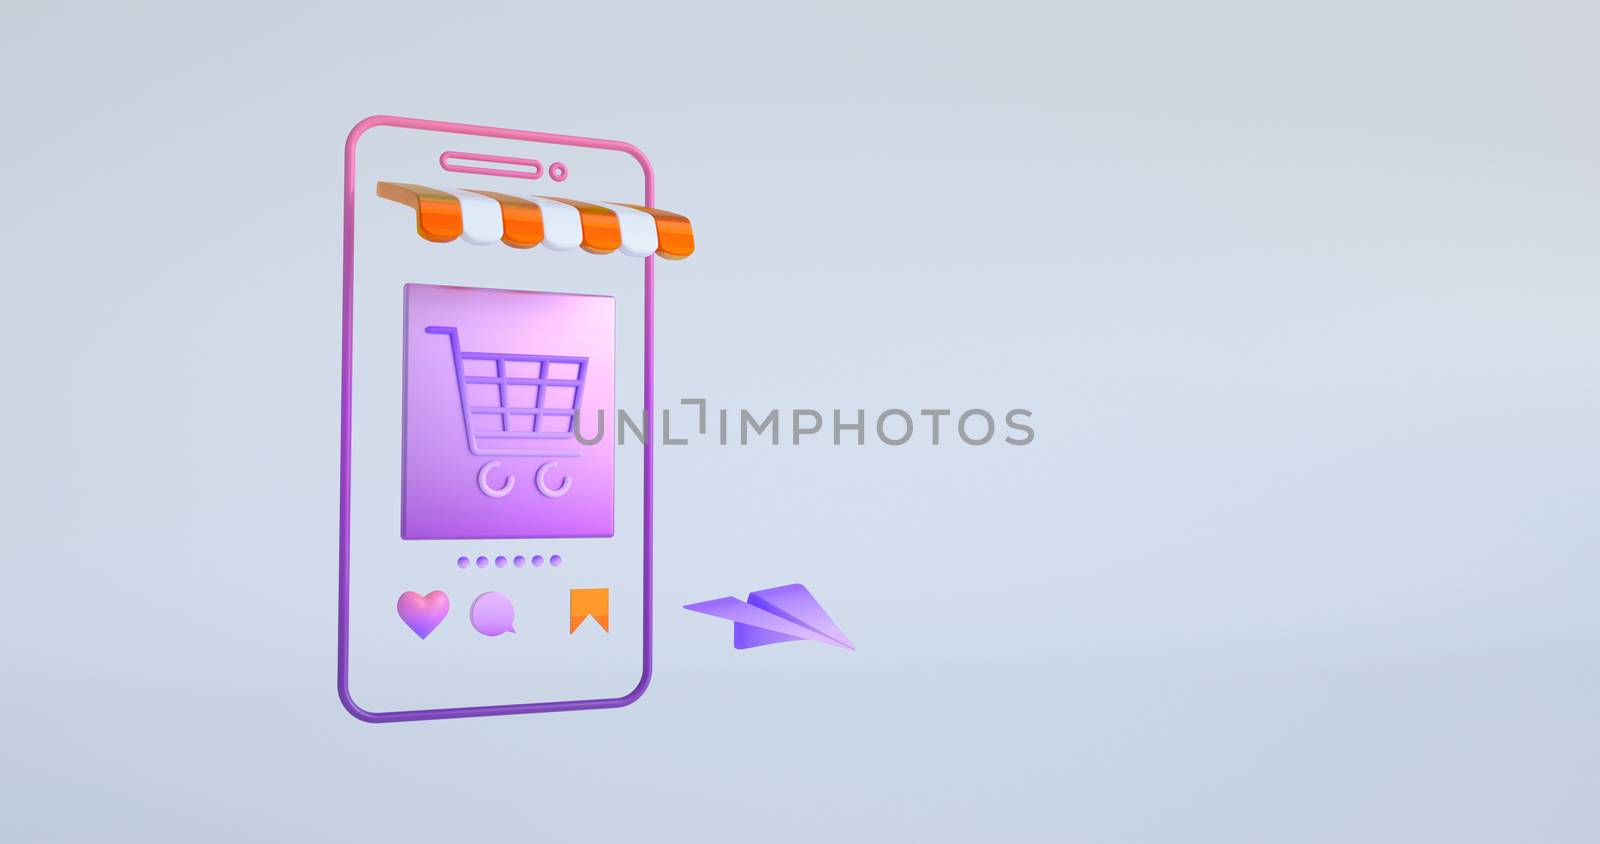 3d rendering of smartphone and shopping cart icon.
